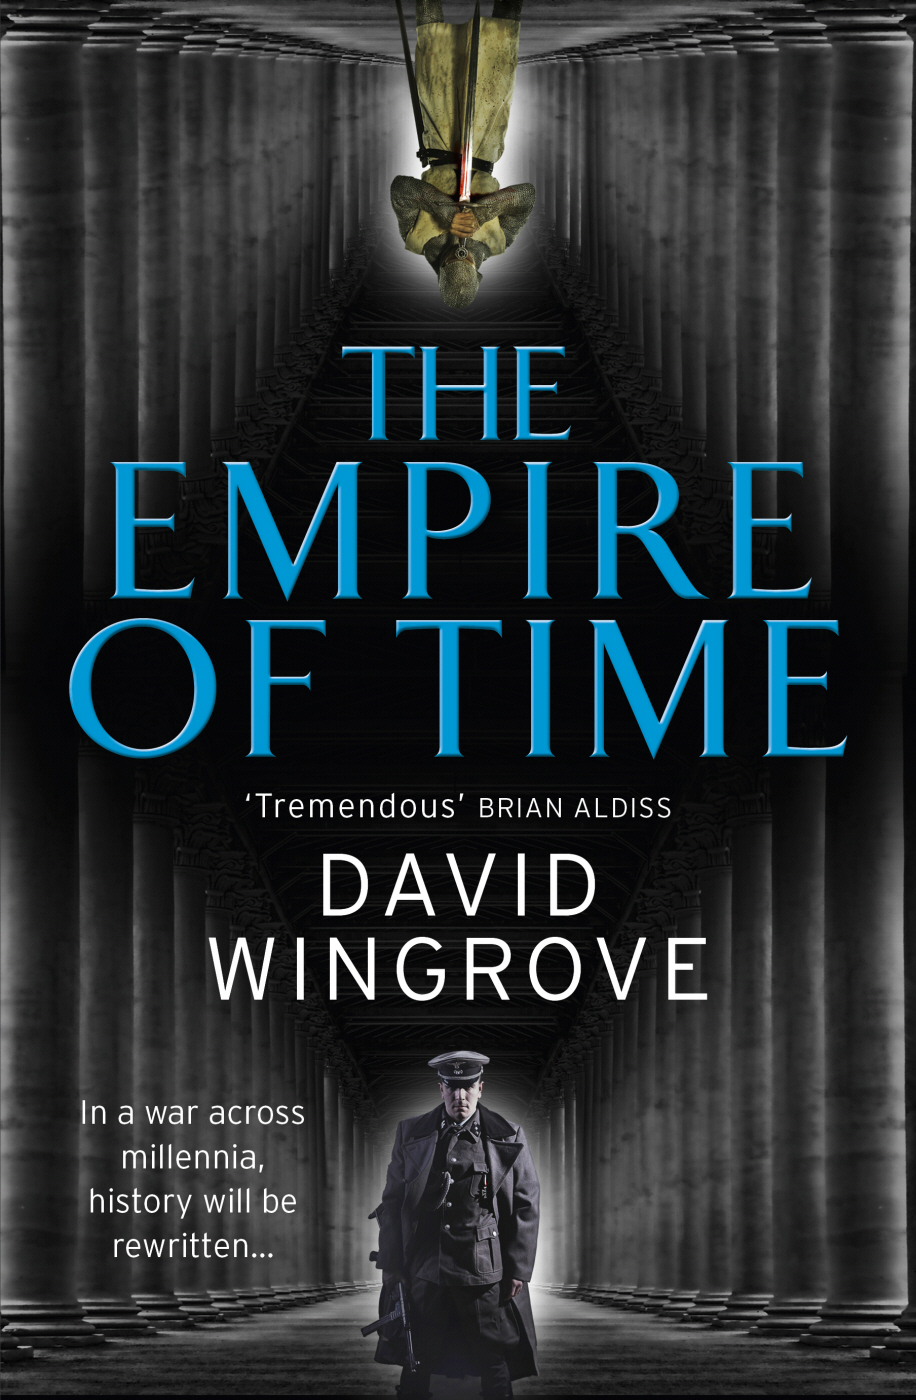 The Empire of Time by David Wingrove